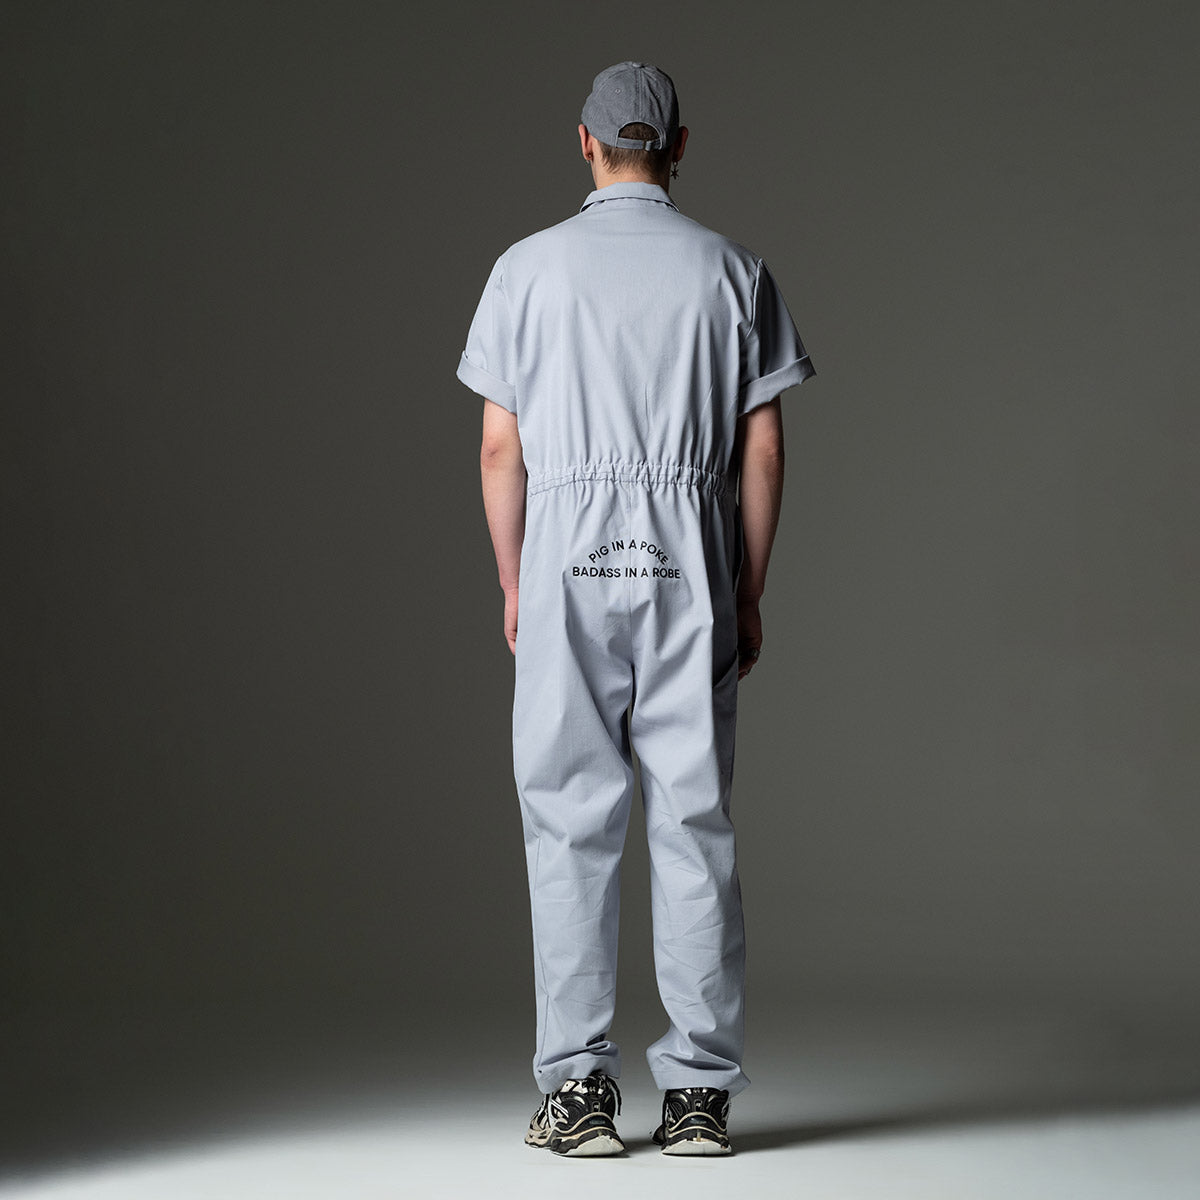 OVERALLS GREY | PIG IN A POKE BADASS IN A ROBE